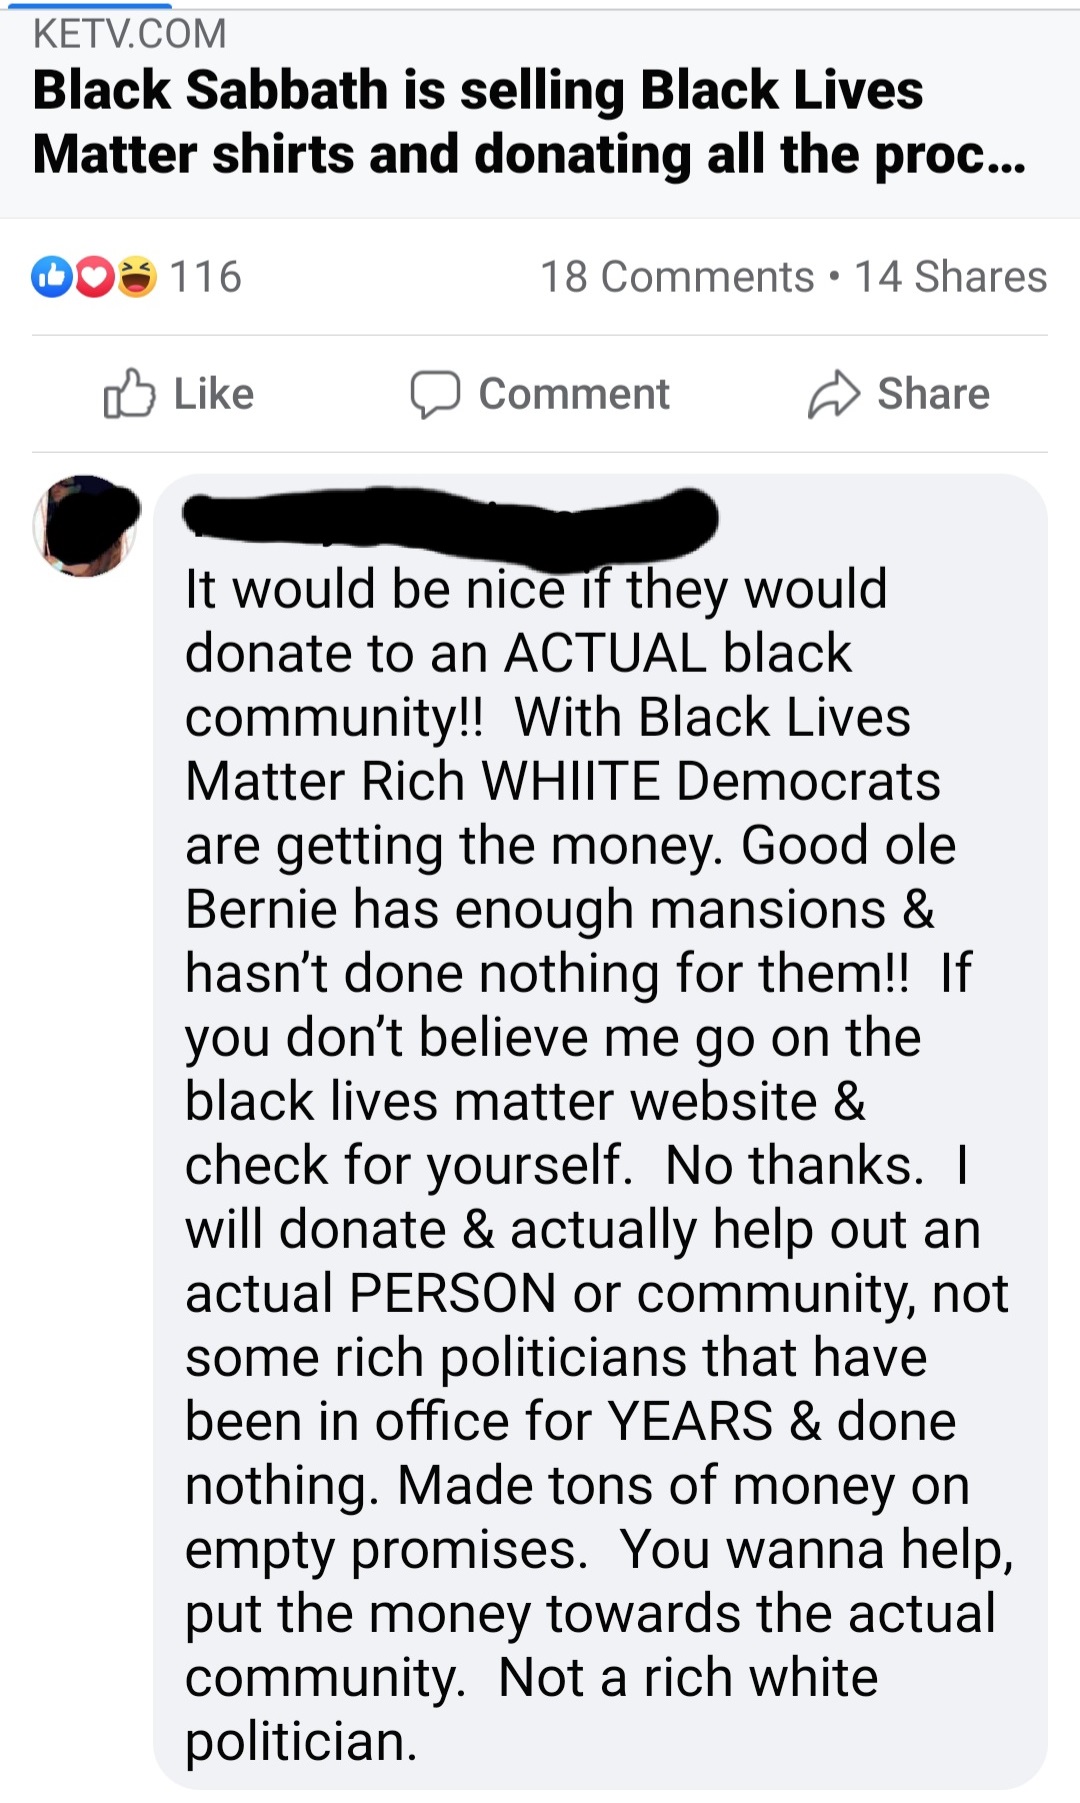 document - Ketv.Com Black Sabbath is selling Black Lives Matter shirts and donating all the proc... 00 116 18 . 14 Comment It would be nice if they would donate to an Actual black community!! With Black Lives Matter Rich White Democrats are getting the mo